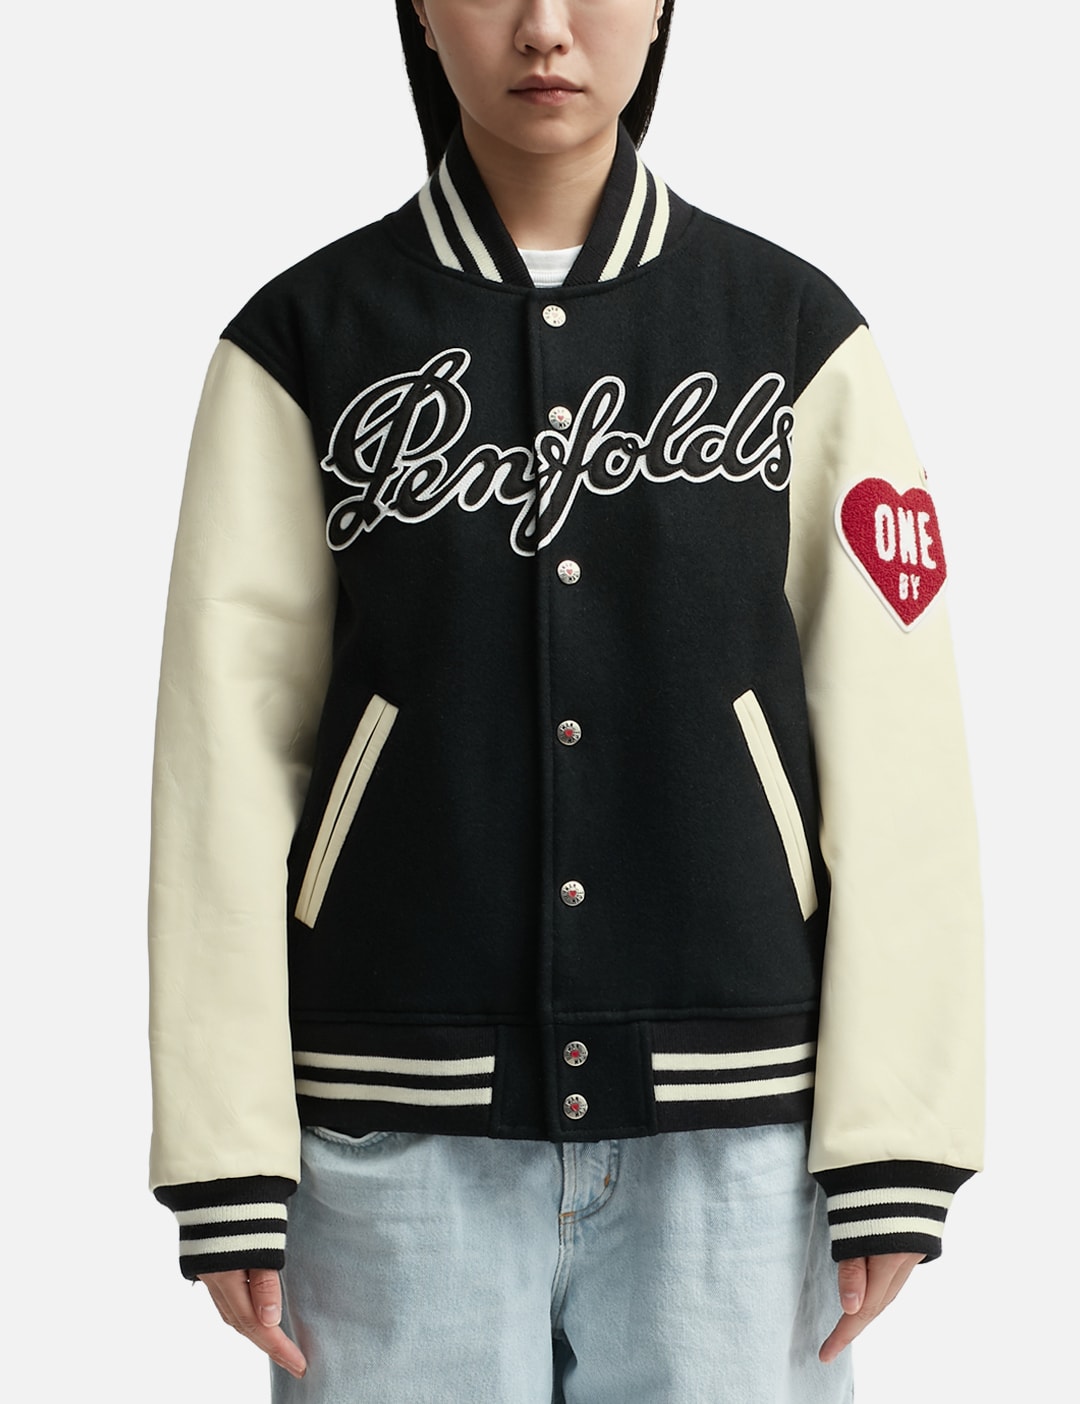 Human Made - One By Penfolds Varsity Jacket #2 | HBX - Globally Curated ...